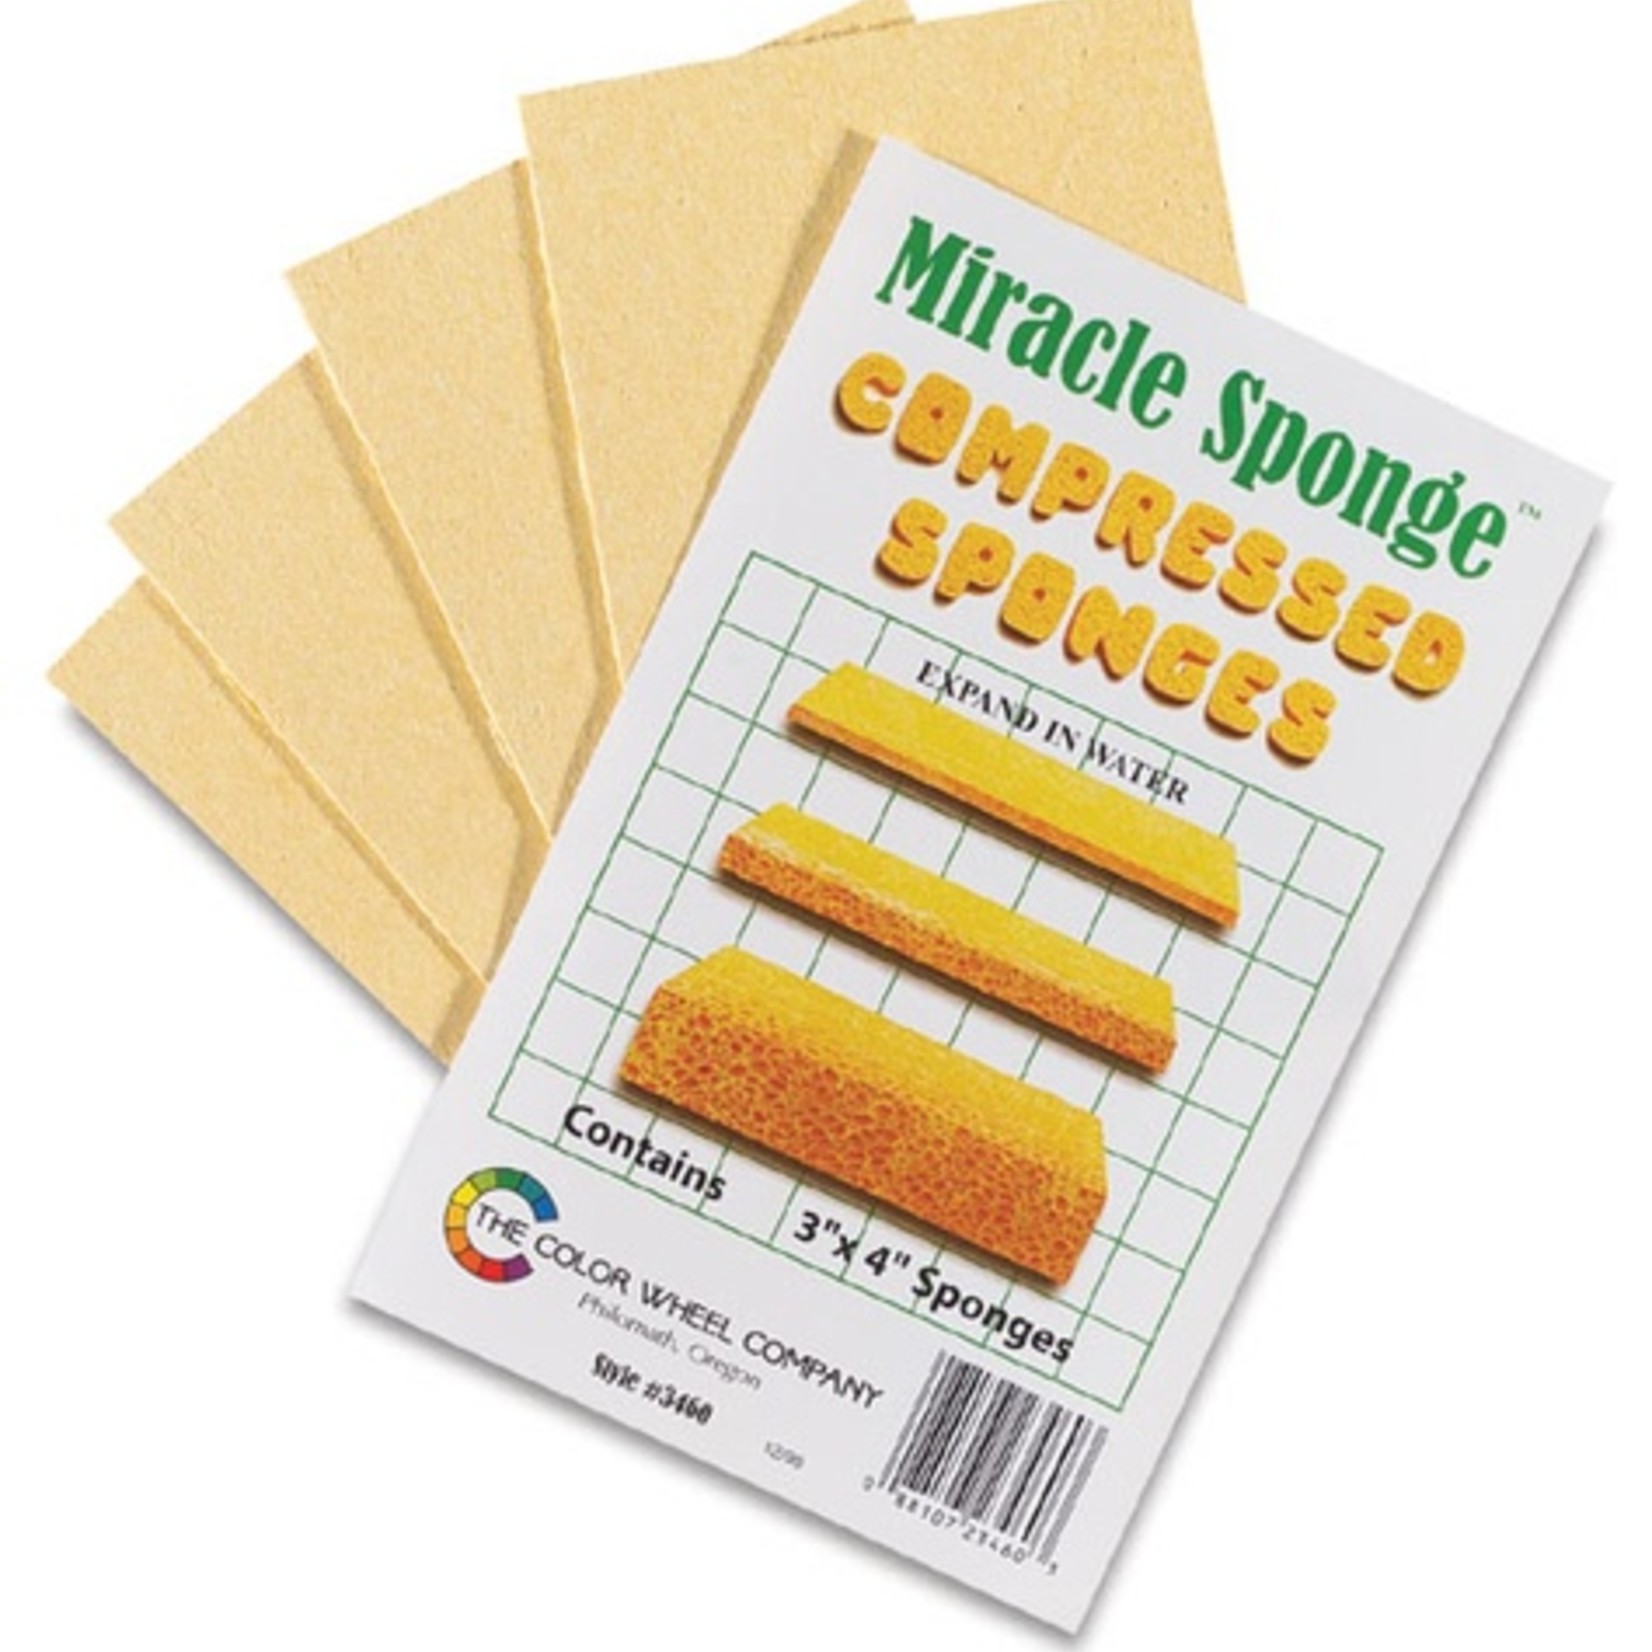 COLOR WHEEL COMPANY MIRACLE SPONGES COMPRESSED SPONGES 3X4 INCH 4/PK   3460